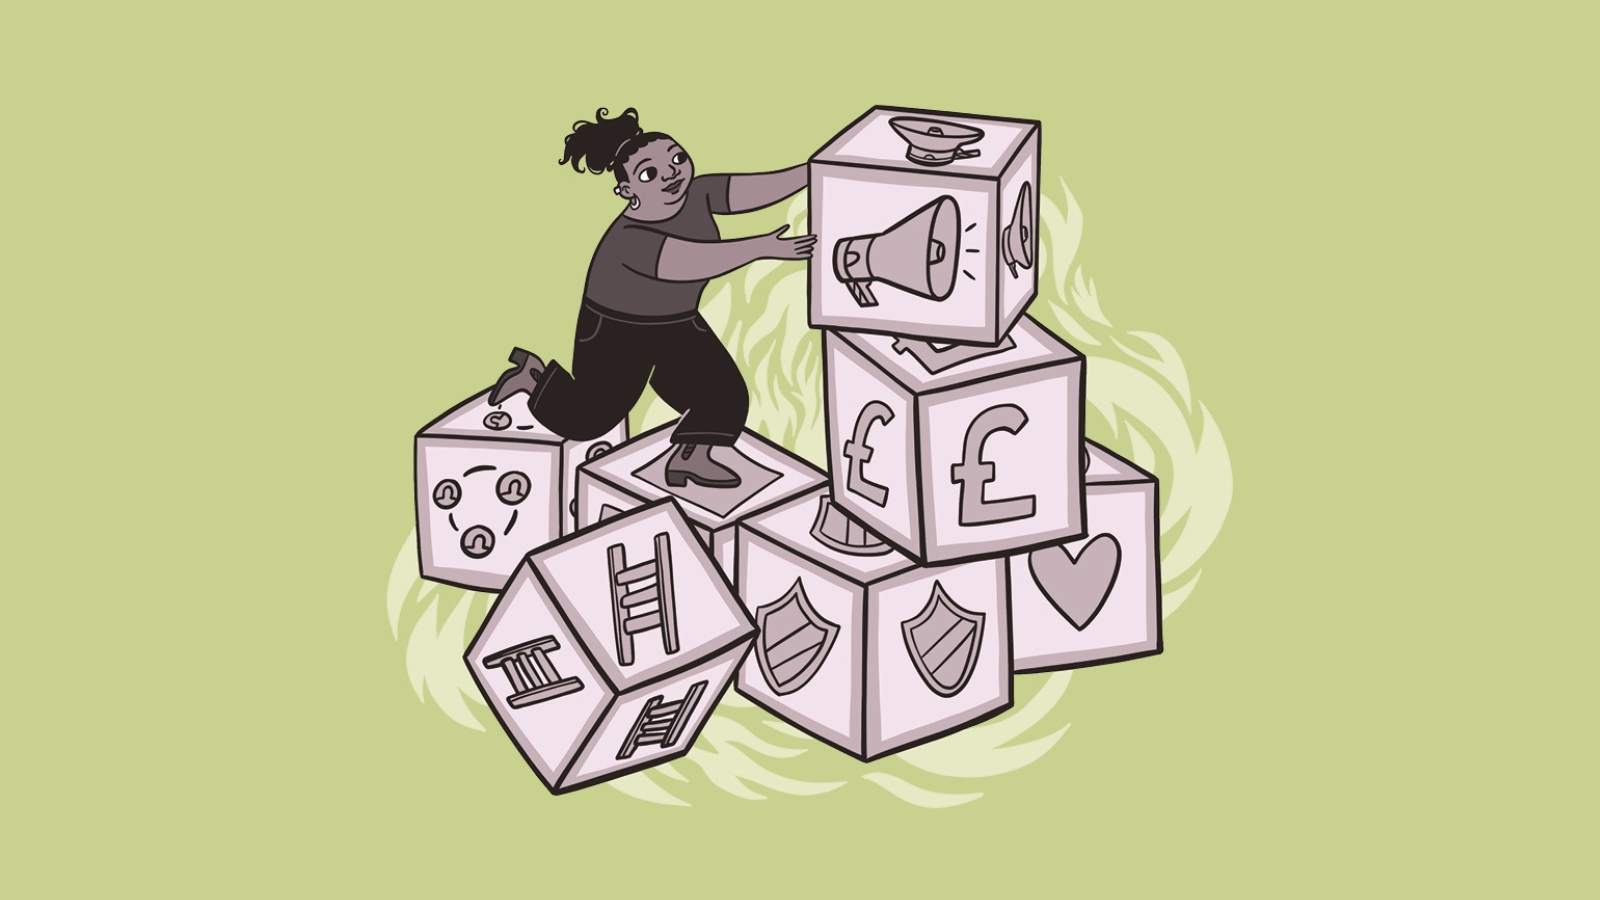 An illustration of a woman standing on building blocks with various symbols representing working life, such as a pound sign, and a megaphone